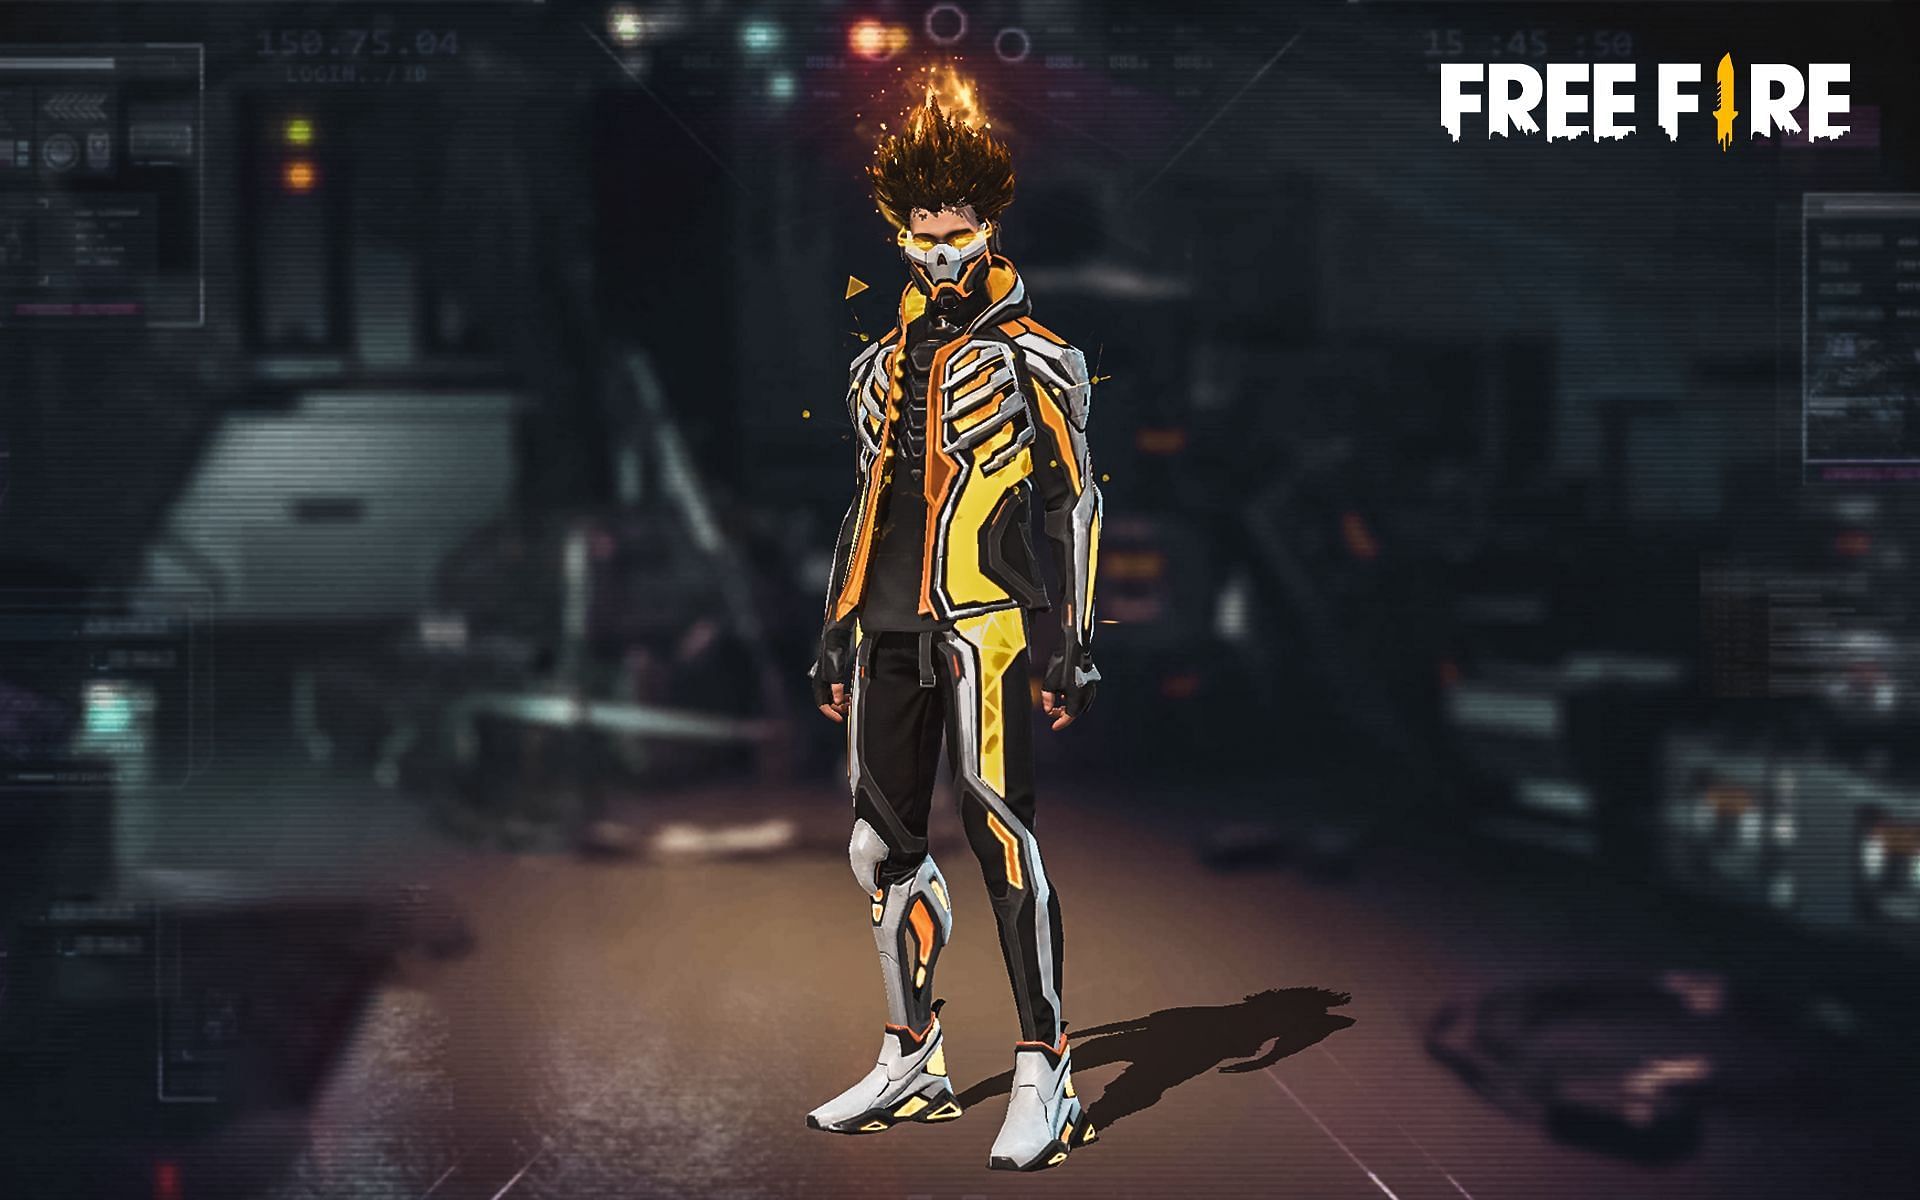 Free Fire's Booyah Day 2022 launches Trend+, new skin system - Dot